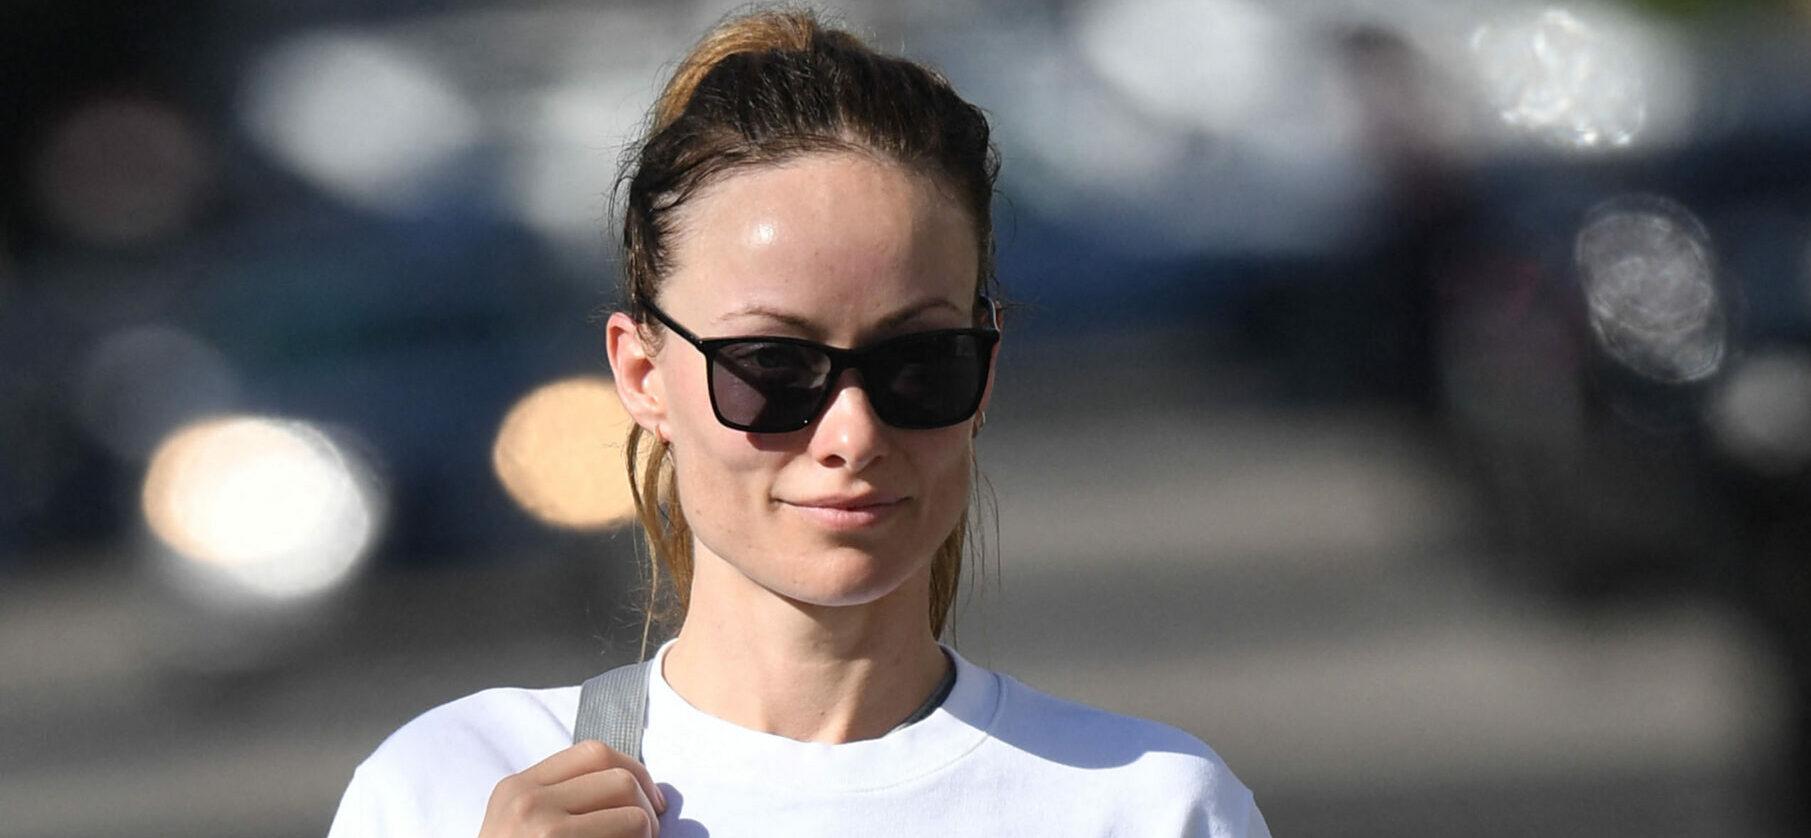 Olivia Wilde leaves the gym smiling after a hard workout